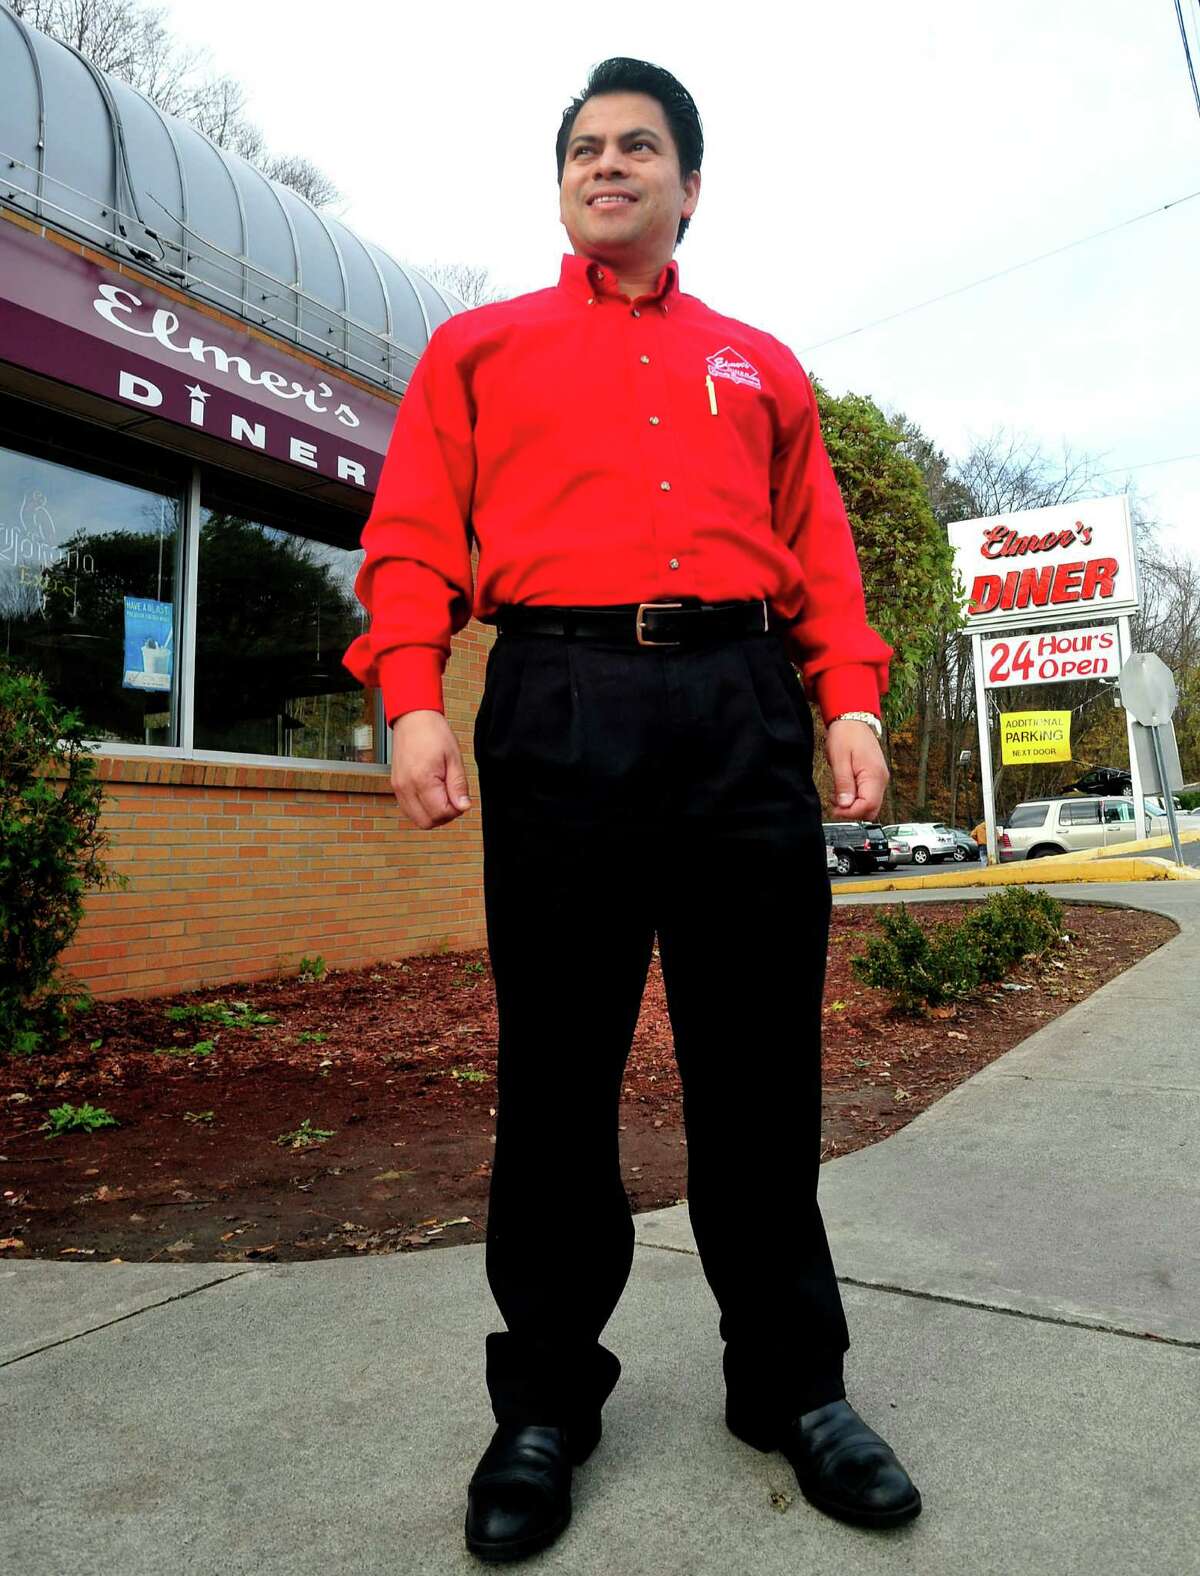 Elmer Palma stands outside his Danbury business, Elmer's Diner, Friday, Nov. 16, 2012. Palma serves as a member of the Danbury Zoning Commission.